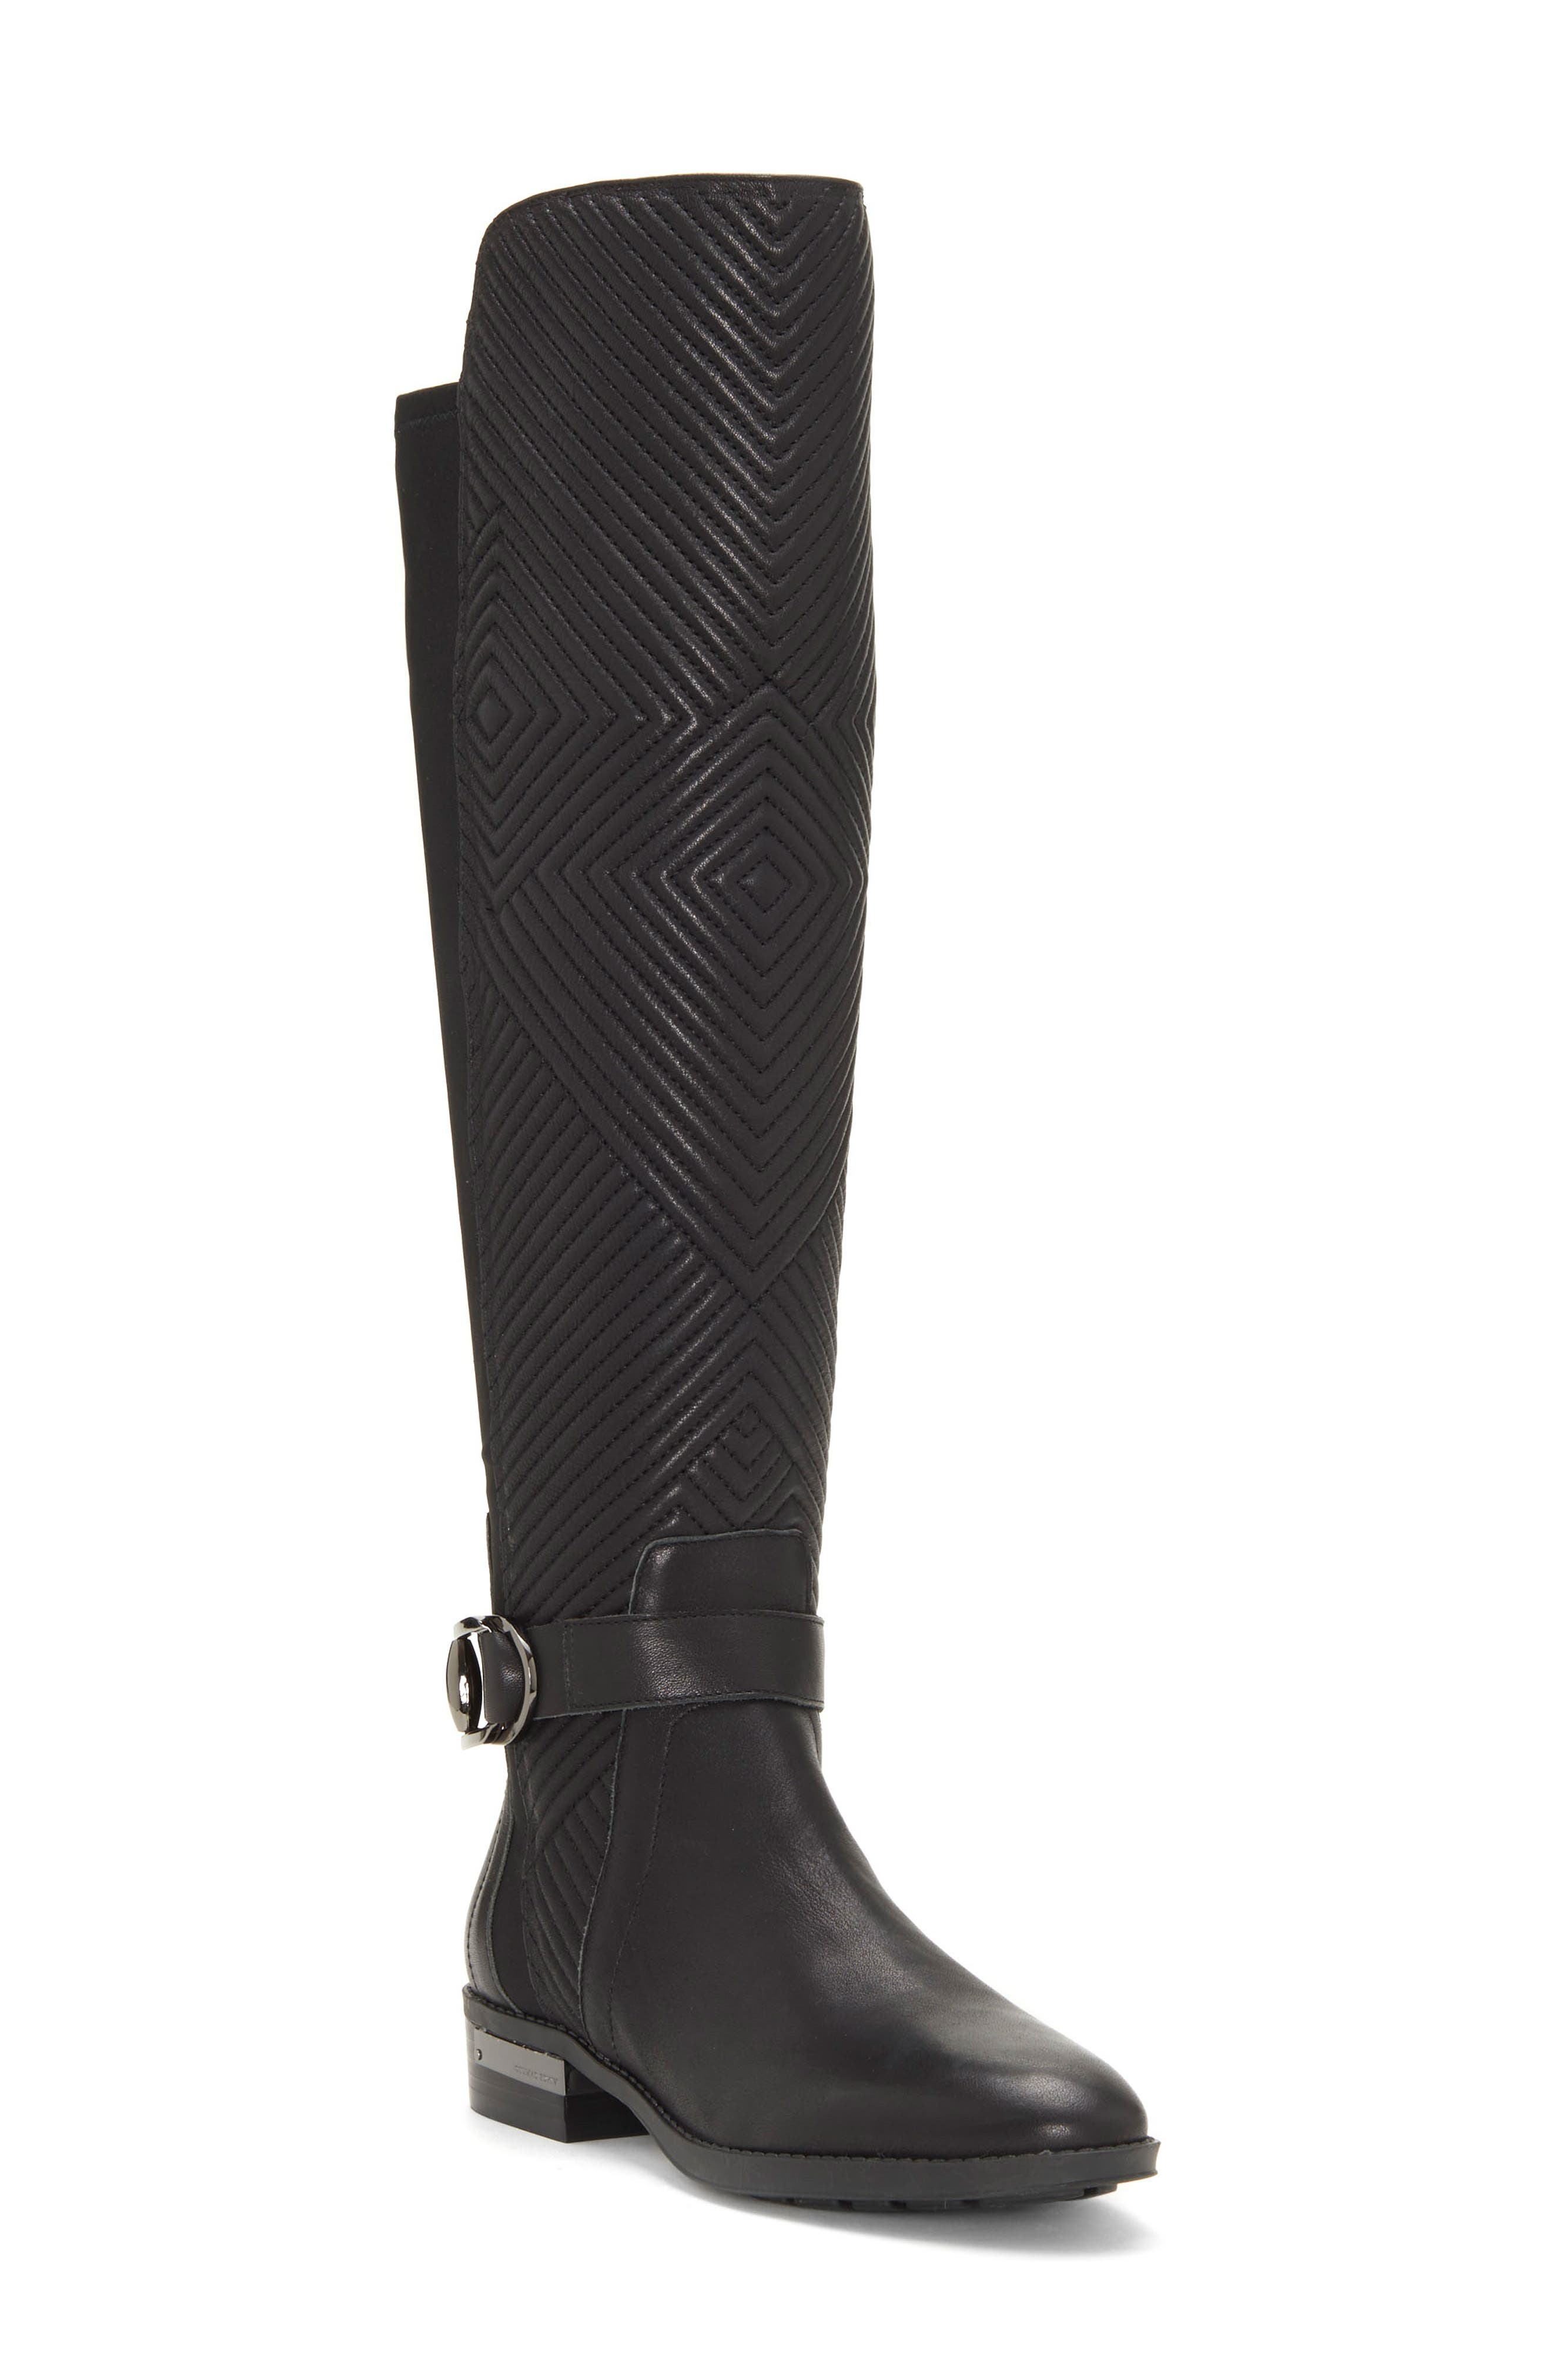 UPC 190662937704 product image for Women's Vince Camuto Pordalia Over-The-Knee Boot, Size 6 M - Black | upcitemdb.com